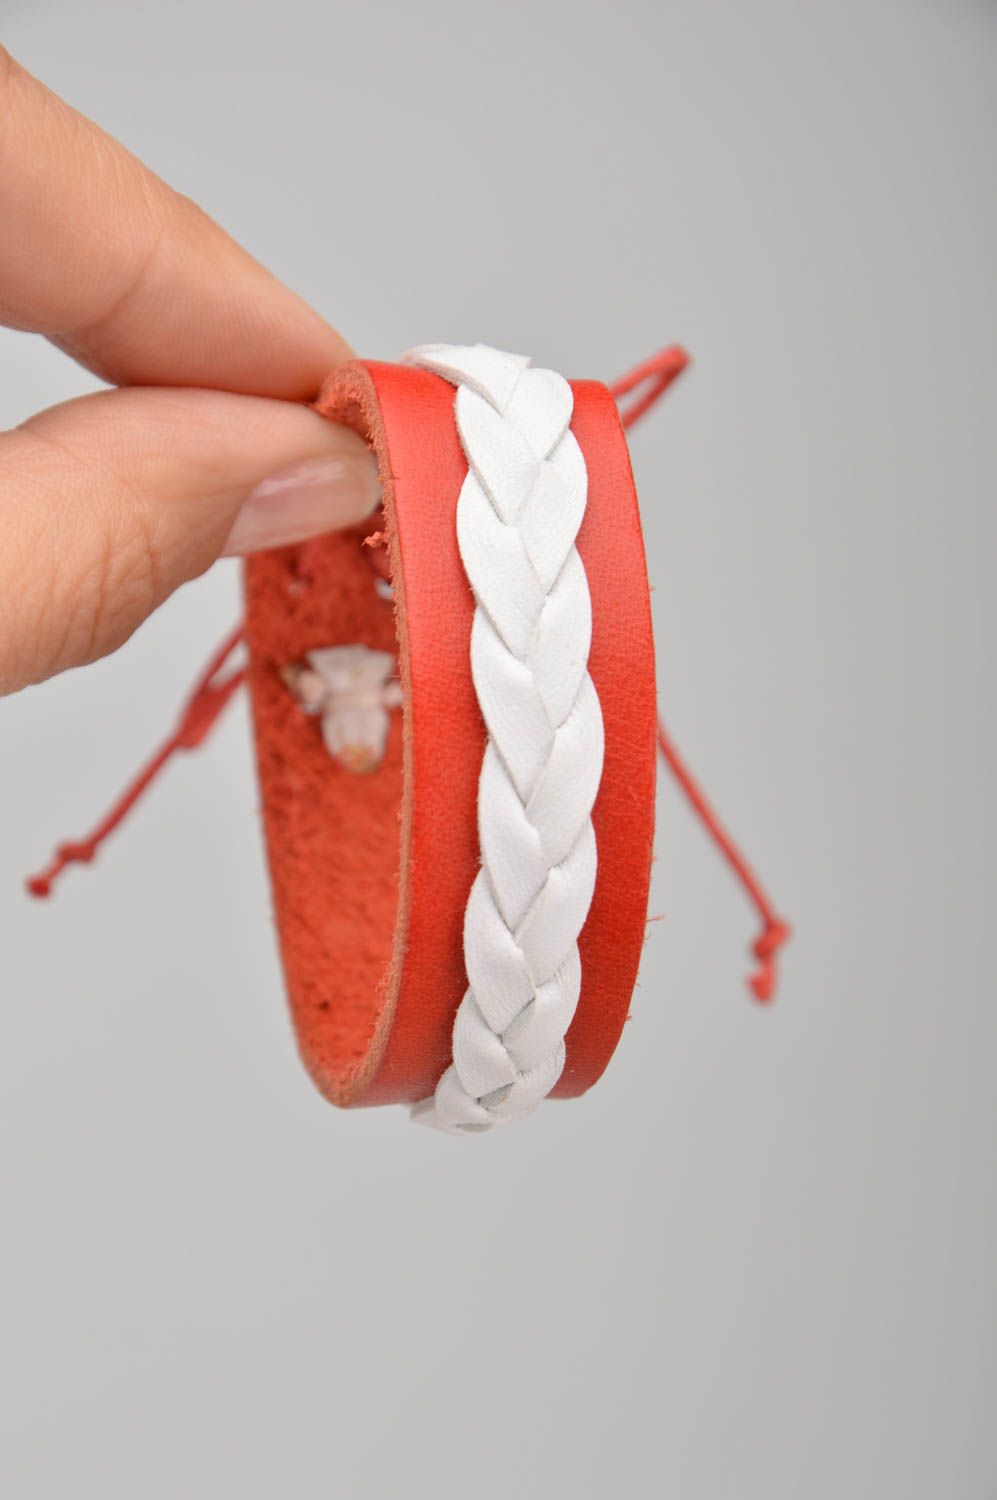 Handmade designer red leather bracelet with white leather braid for women photo 5